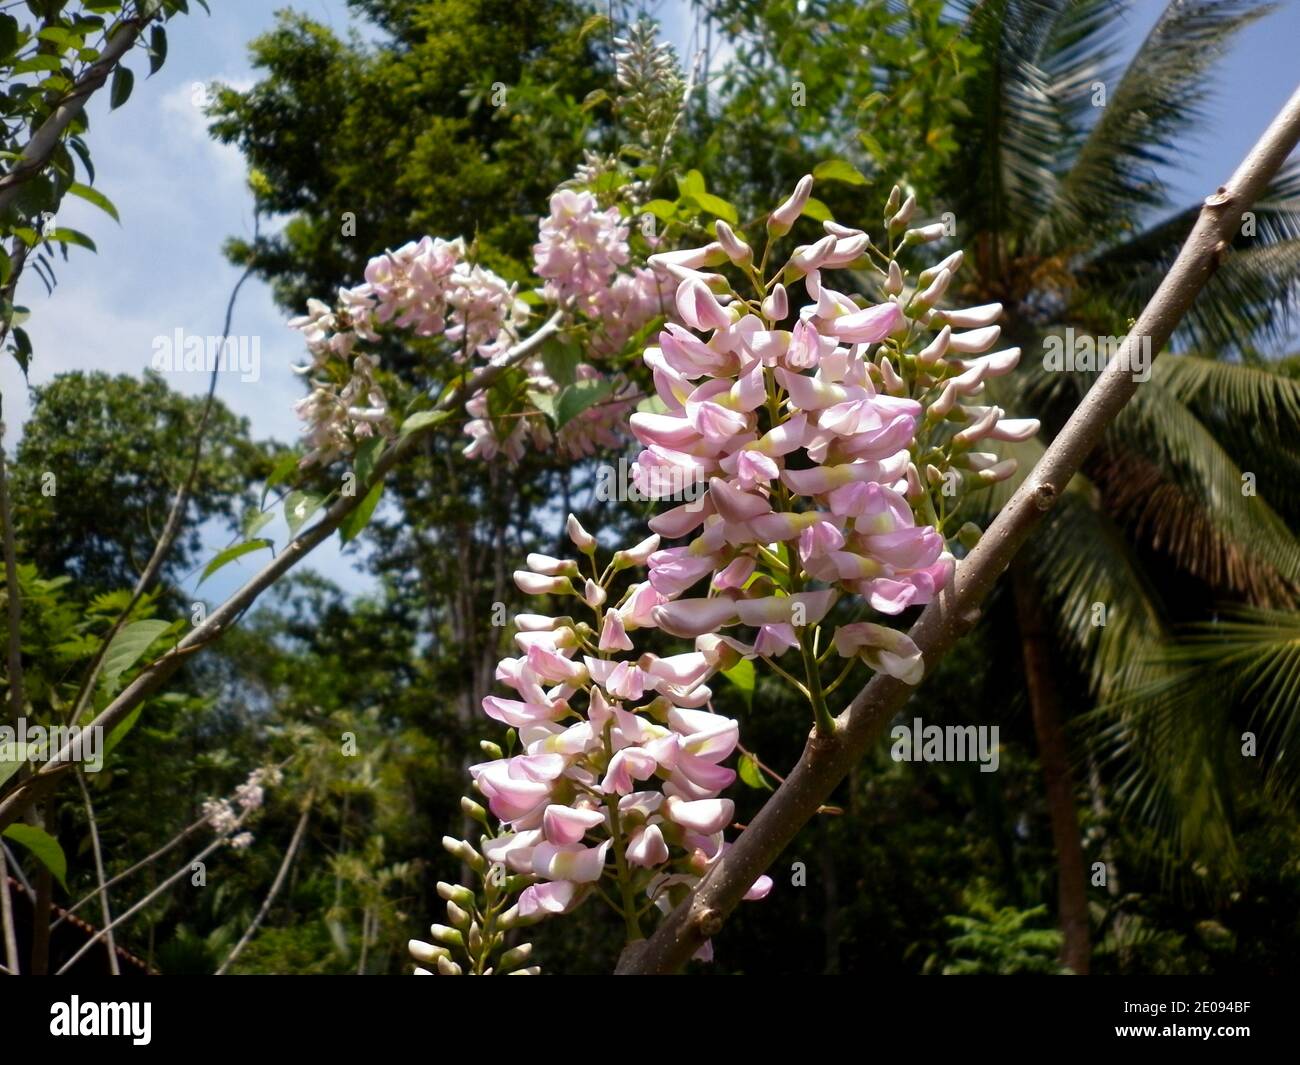 Bunch of poisonous pink wild flowers Stock Photo